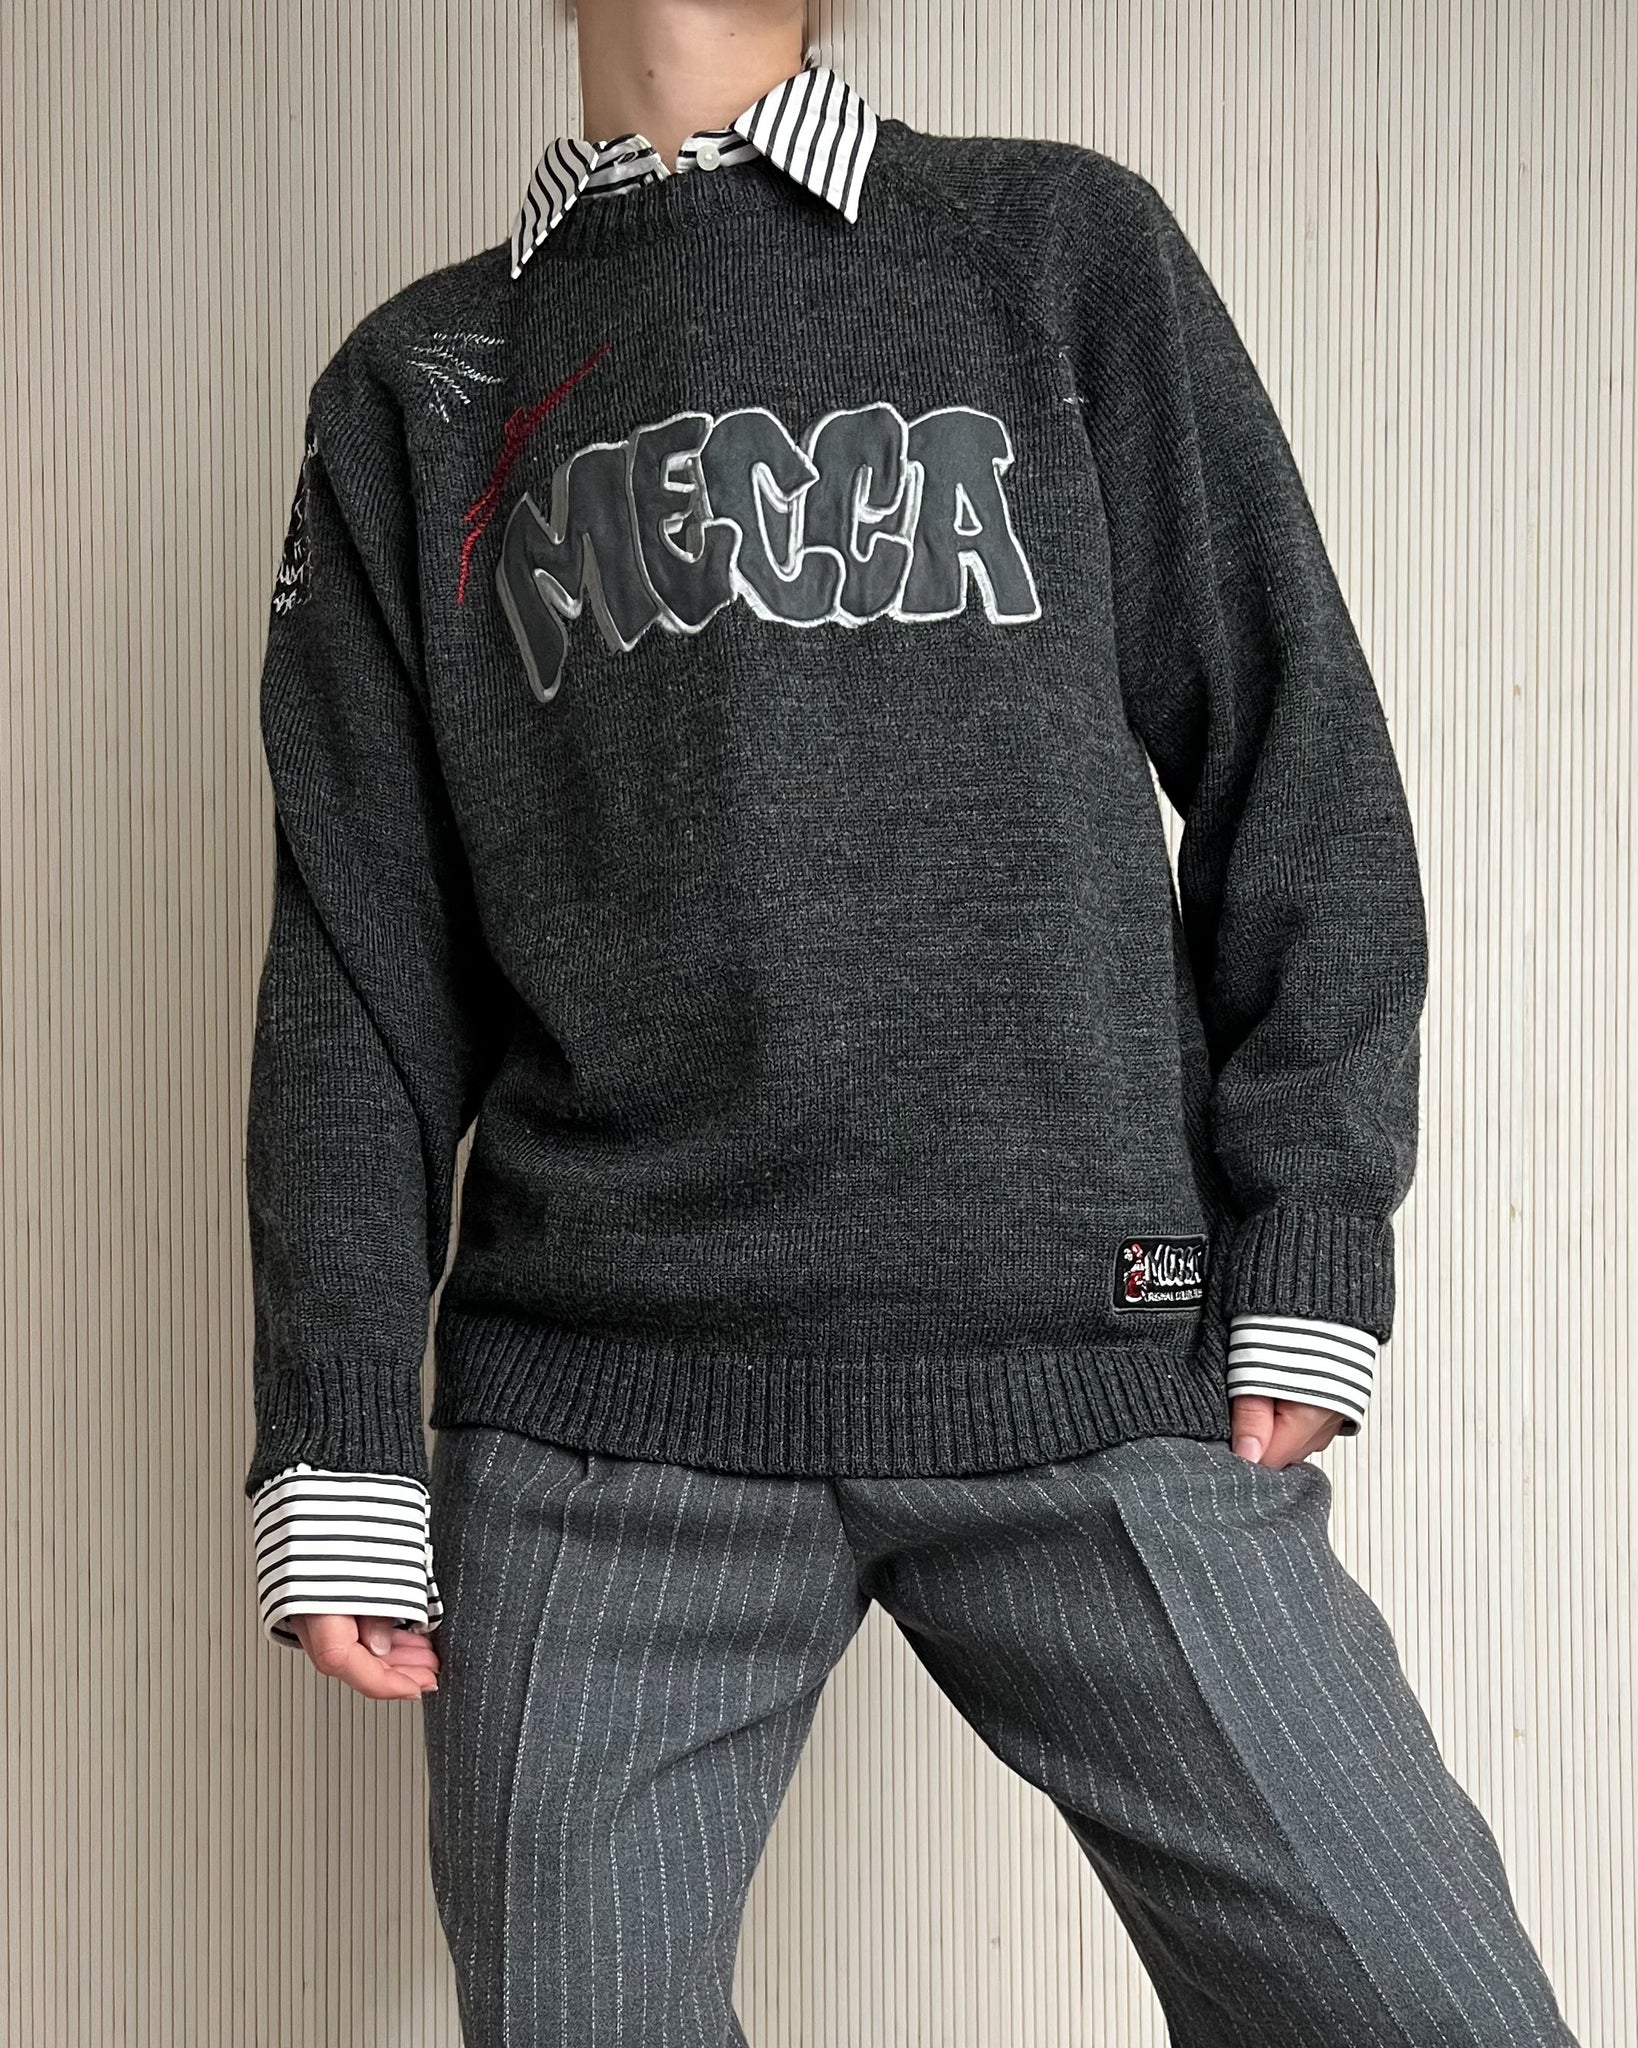 90s Mecca Graphic Sweater (Fits S/M)